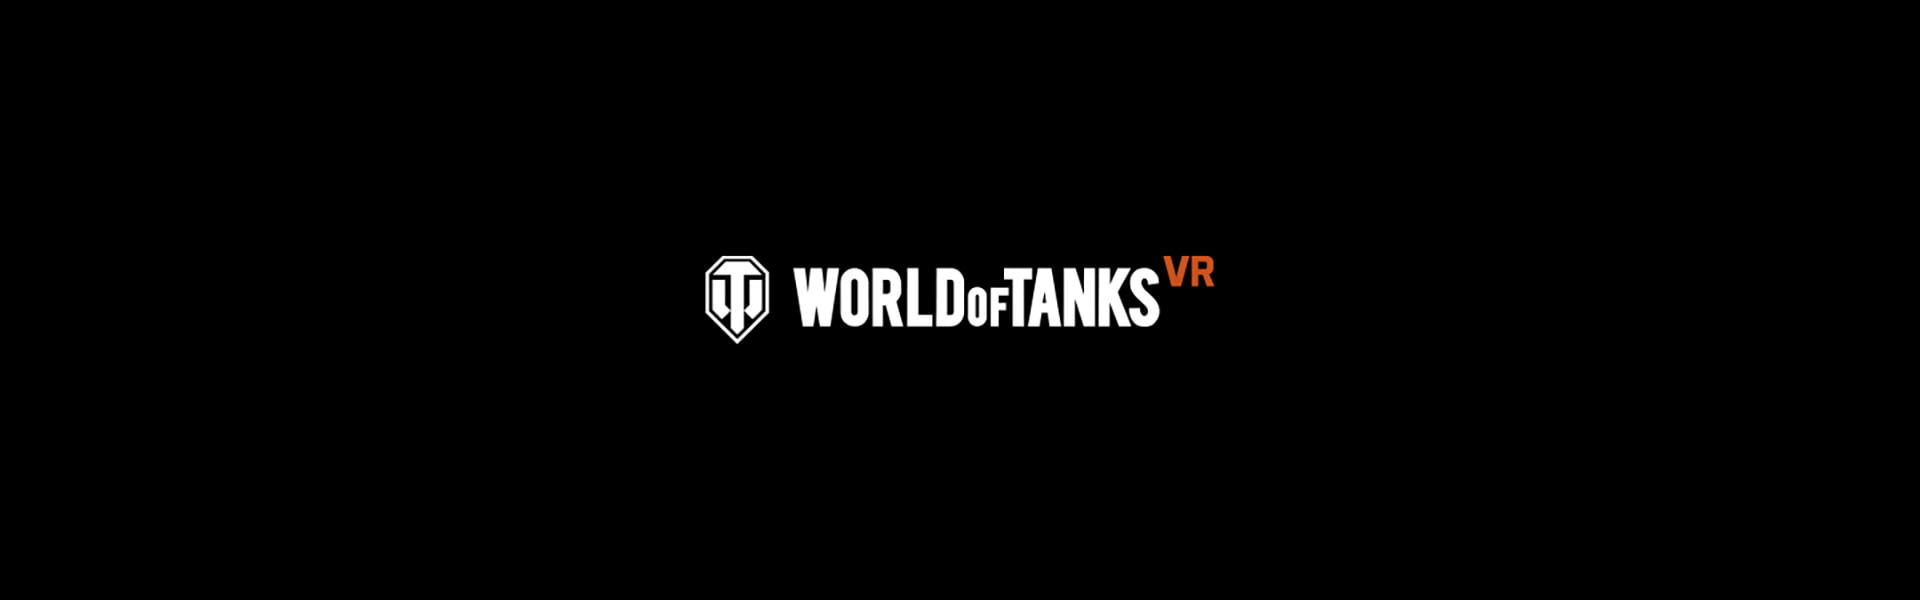 Wargaming blasts into the VR market with World of Tanks VR 12